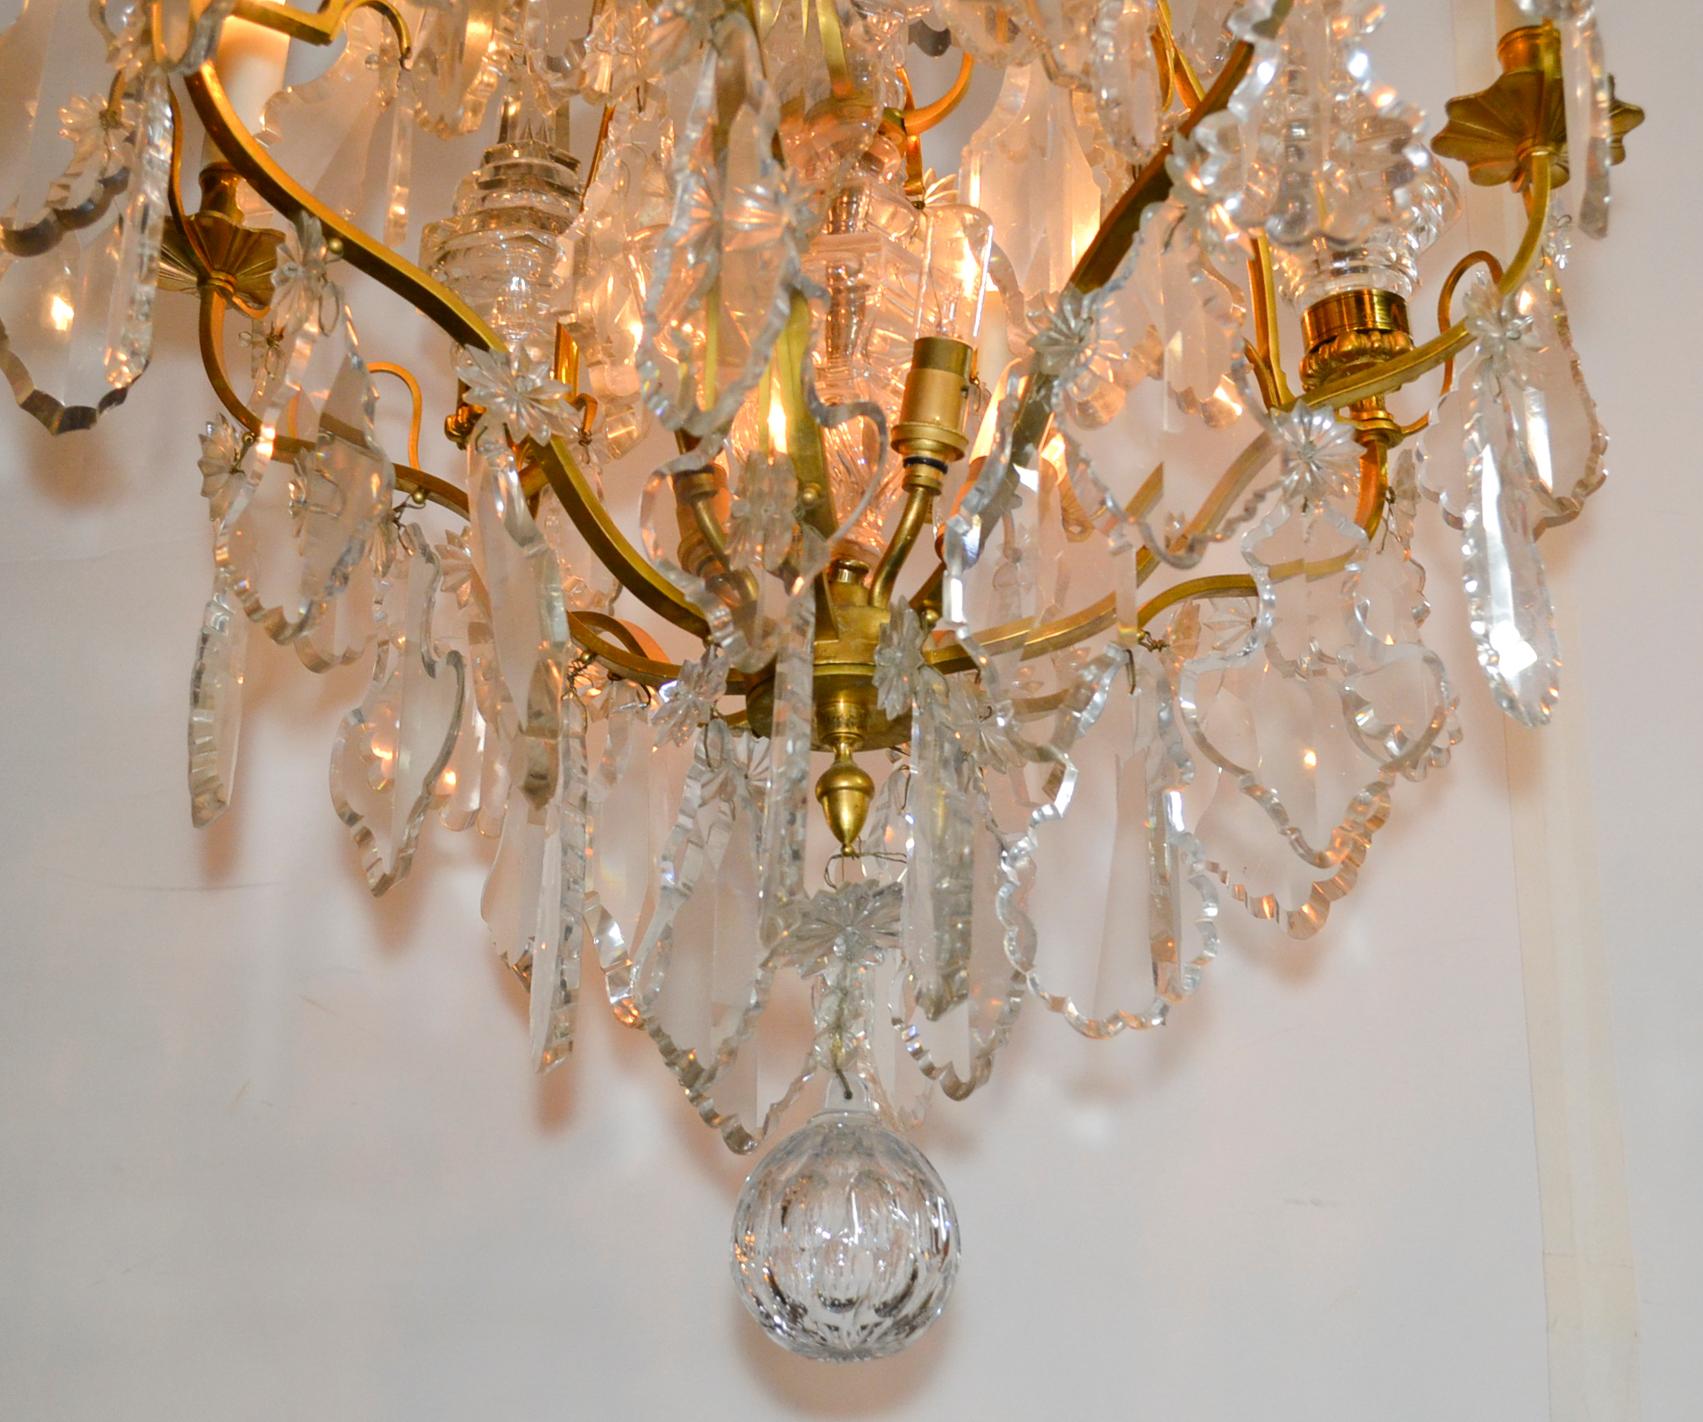 Great antique French gilt bronze and crystal chandelier.  Attributed to baccarat.   Best dore’ bronze finish you will find and exceptional quality crystal and spears.   Hard to find quality!   Cleaned and re-wired, ready to hang!